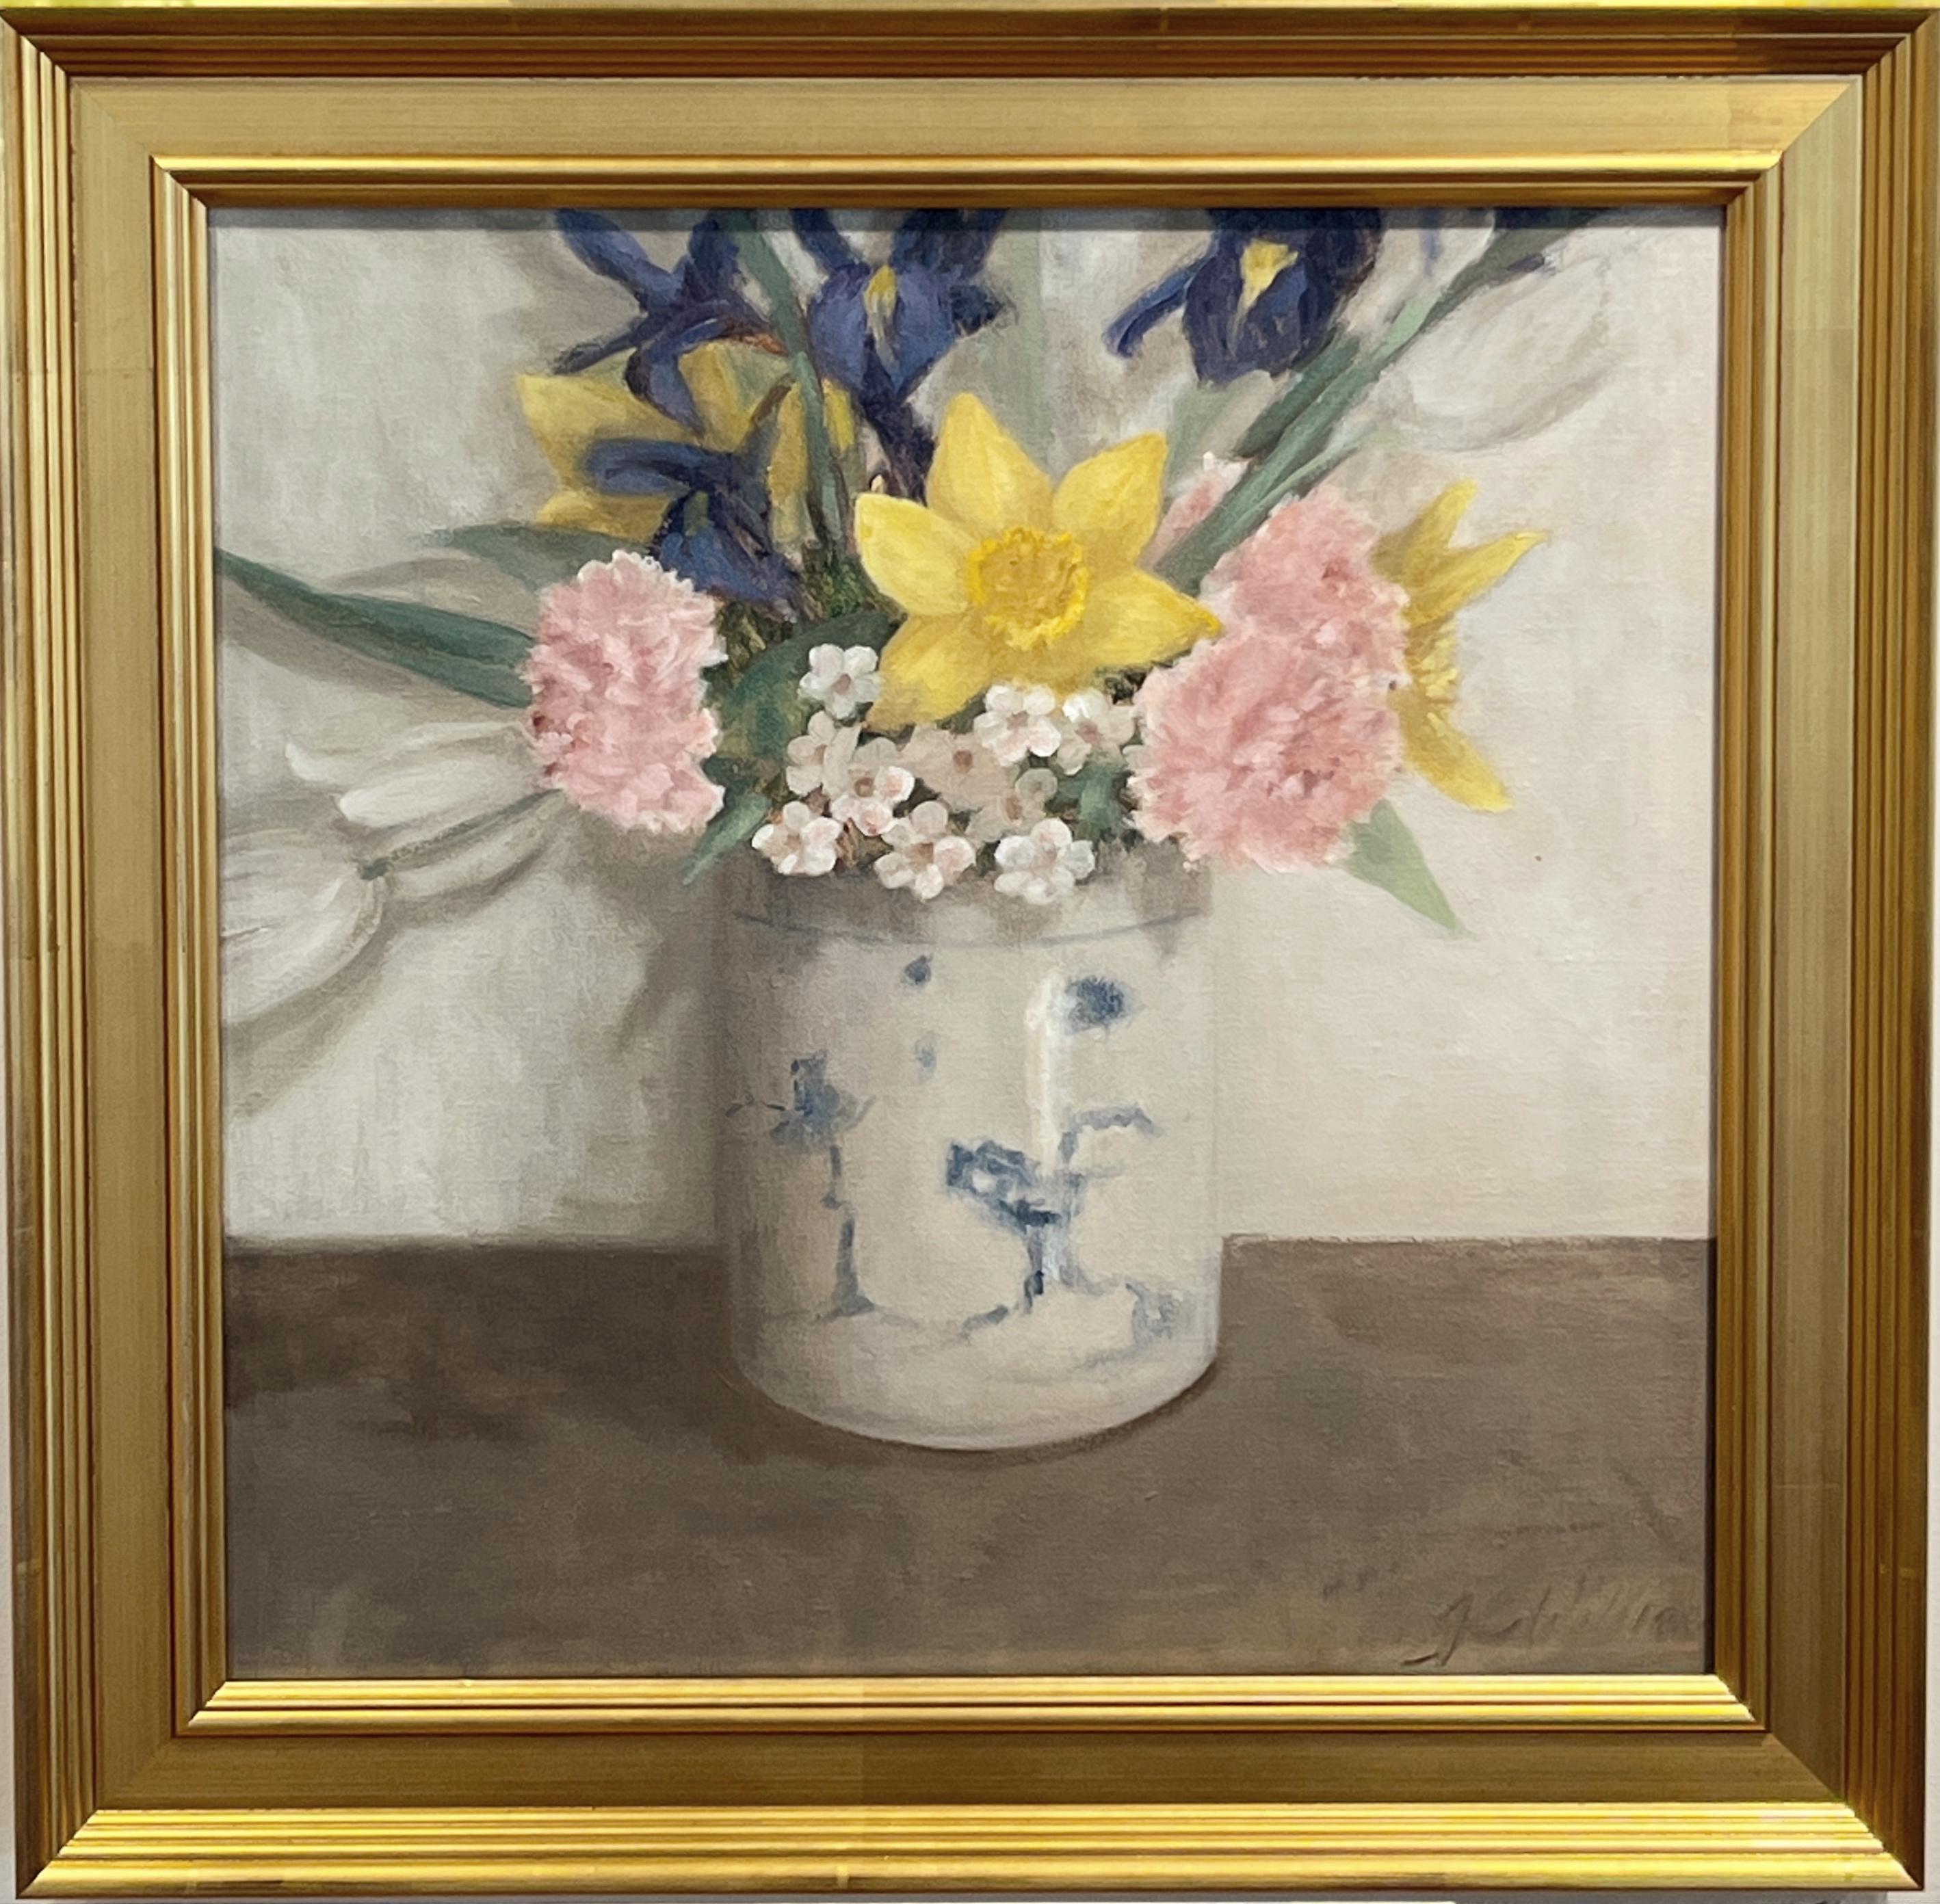 One Day at a Time by Ginny Williams Framed Floral Still Life Oil on Canvas